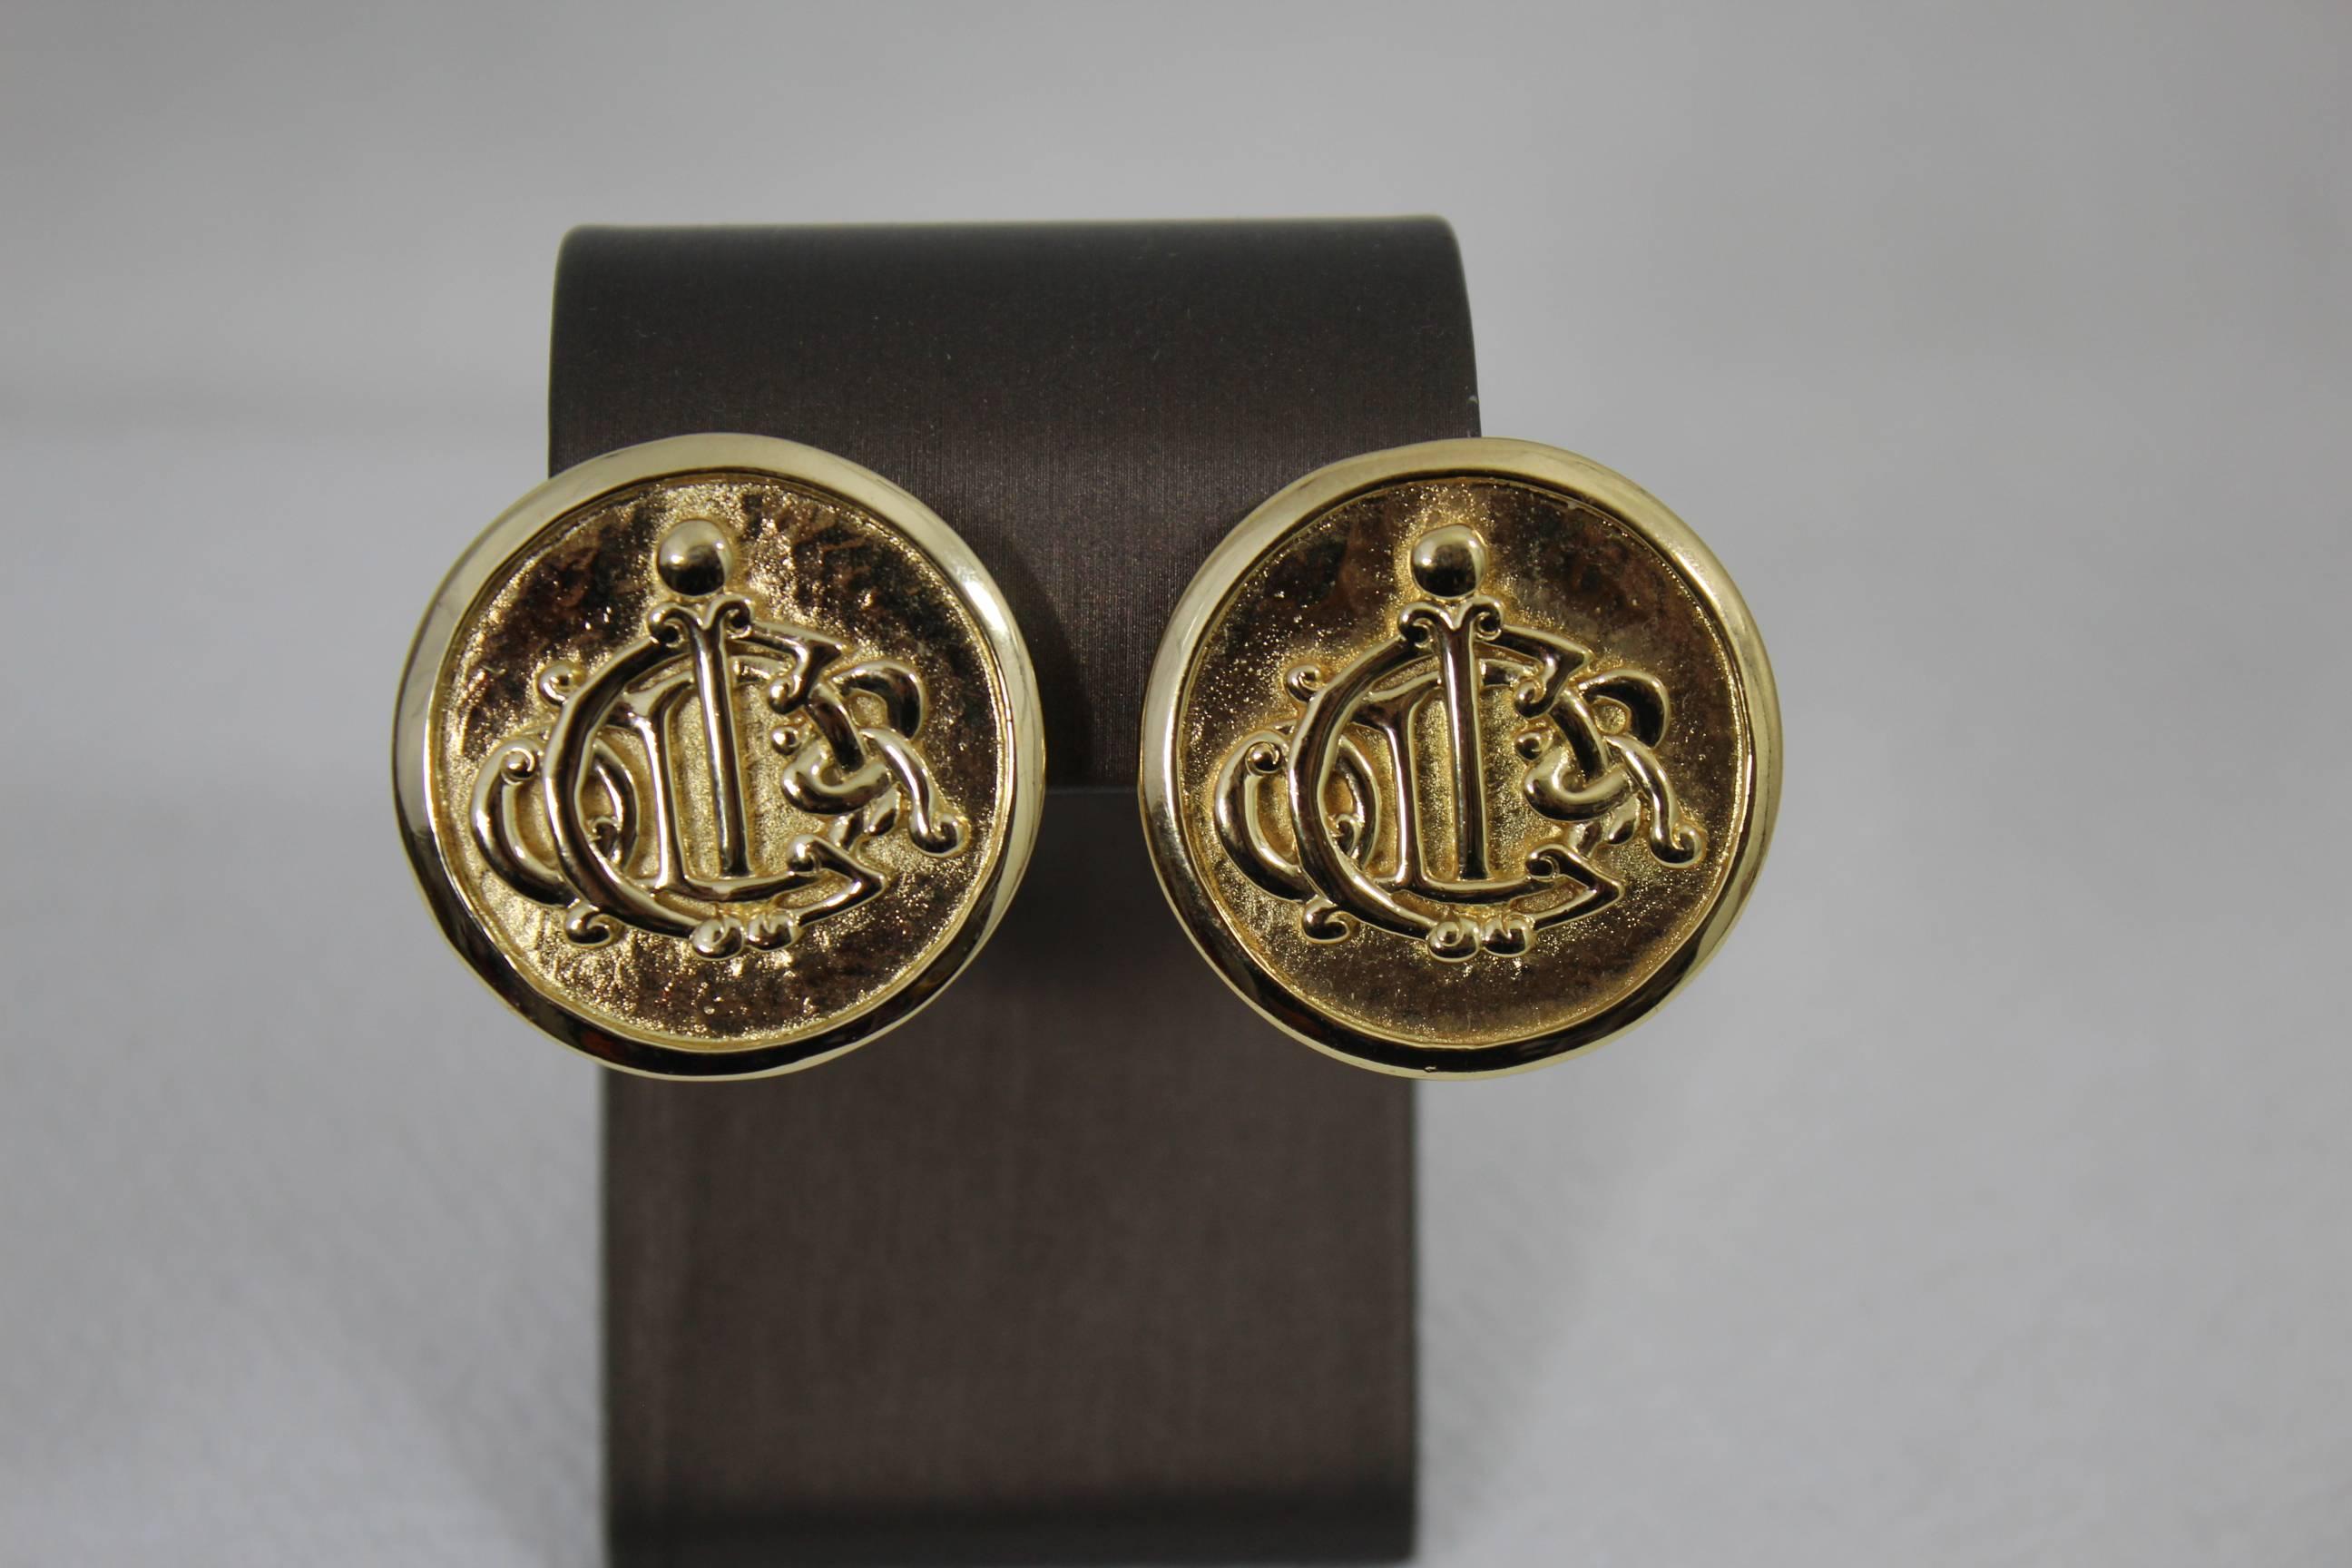 For sale a pair of really nice vintage Christian Dio maxi size earrings.

Really good condition for a vintage piece

Diameter 1.6 inches